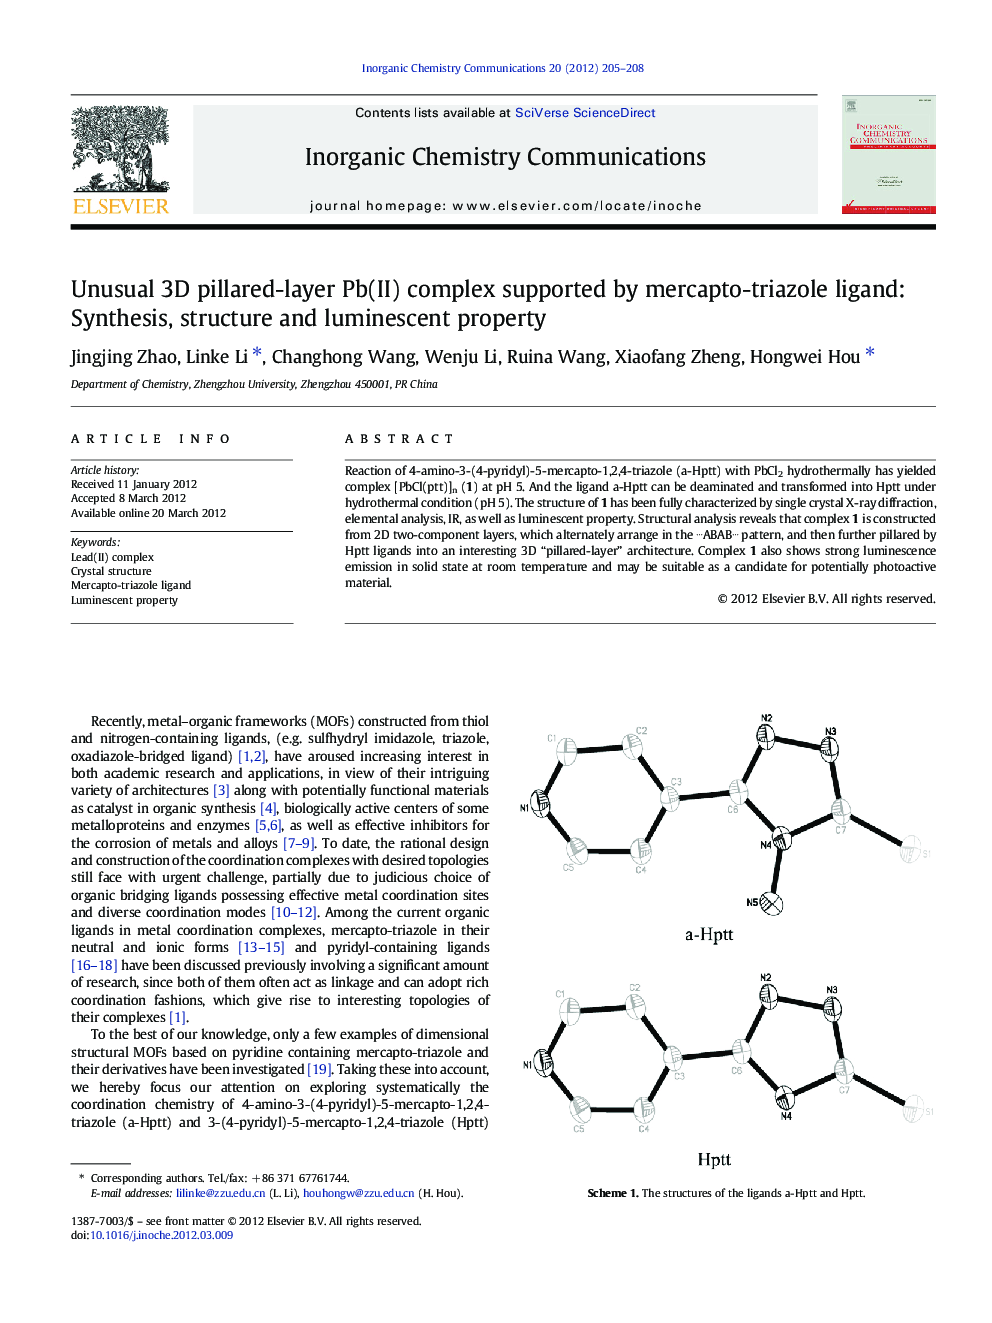 Unusual 3D pillared-layer Pb(II) complex supported by mercapto-triazole ligand: Synthesis, structure and luminescent property